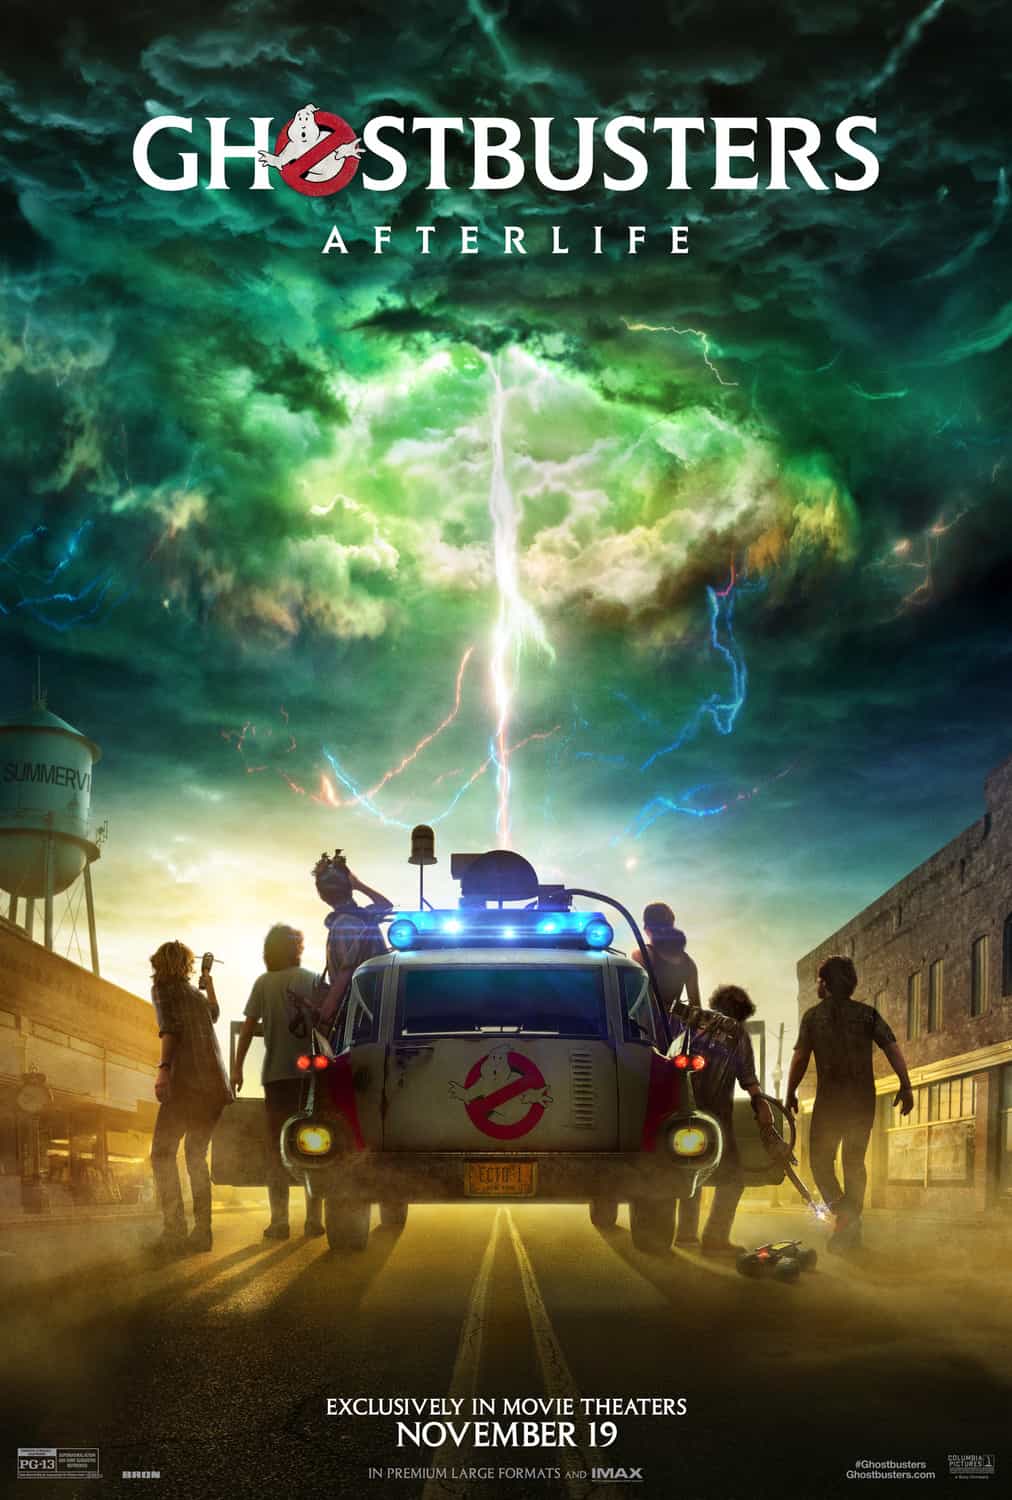 First trailer for new Ghostbusters:Afterlife movie directed by Jason Reitman released